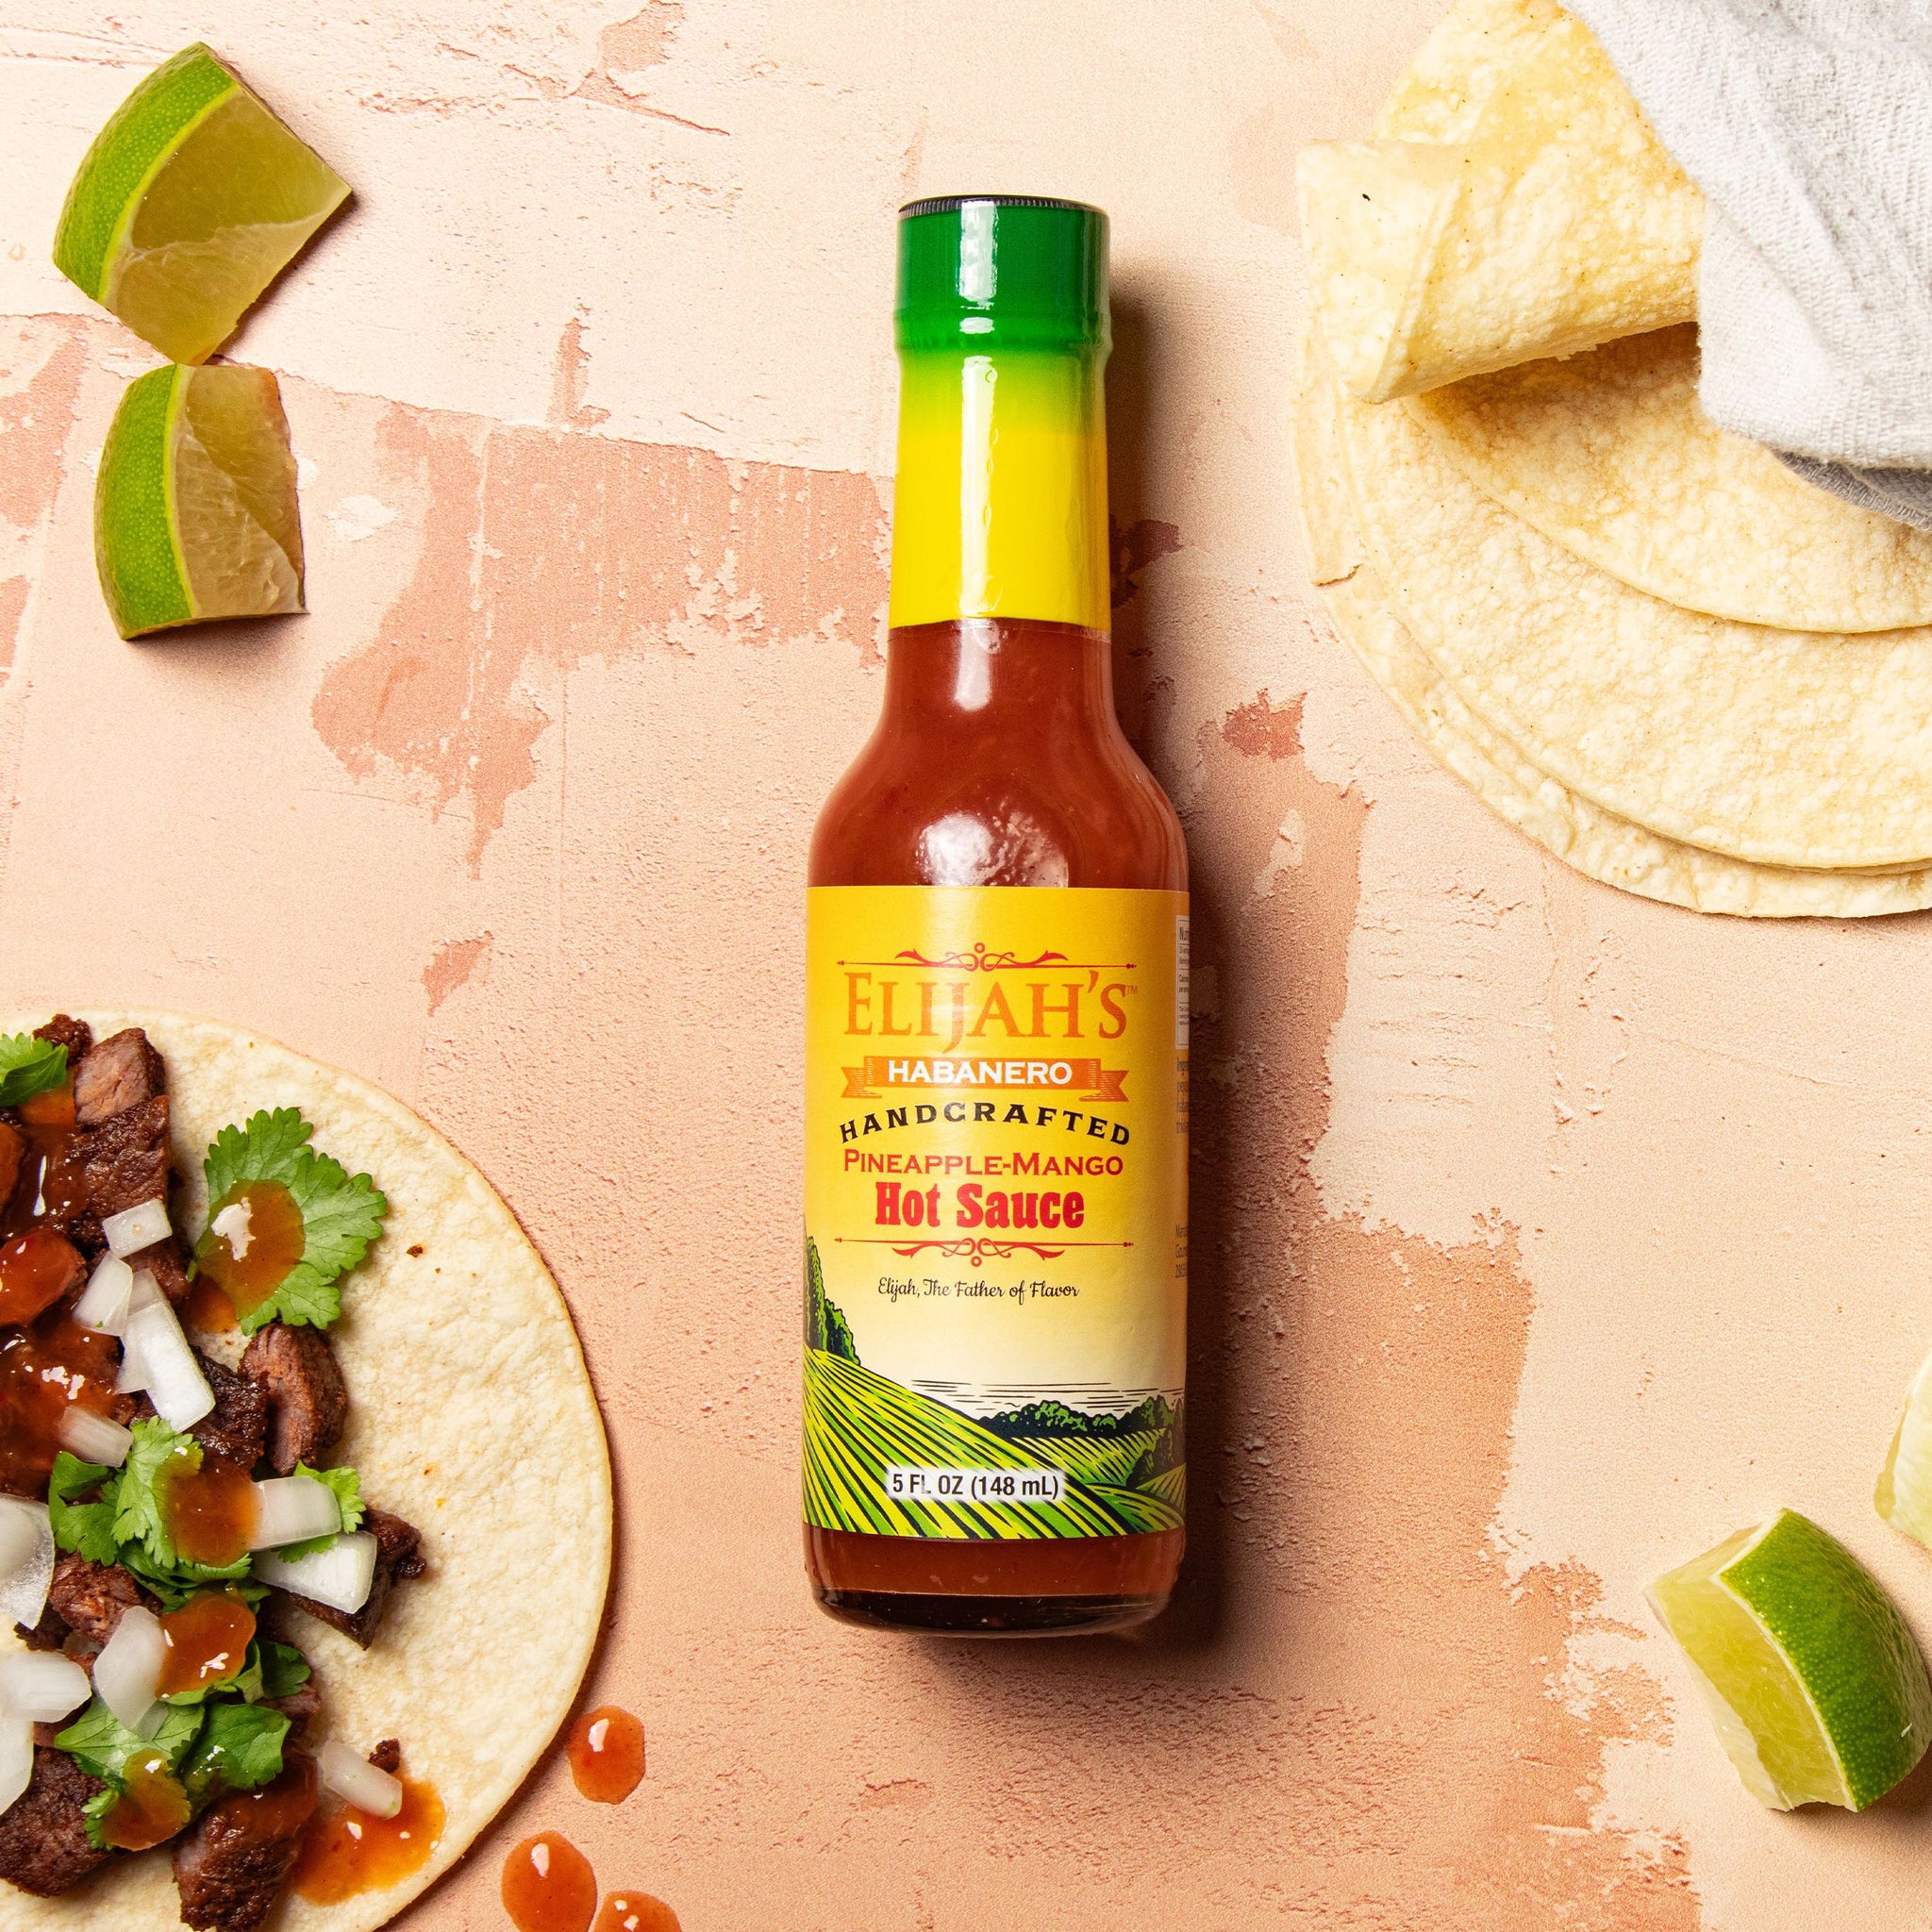 Tabasco Hot Sauce Chipotle Pepper - The Barbacue Store Spain